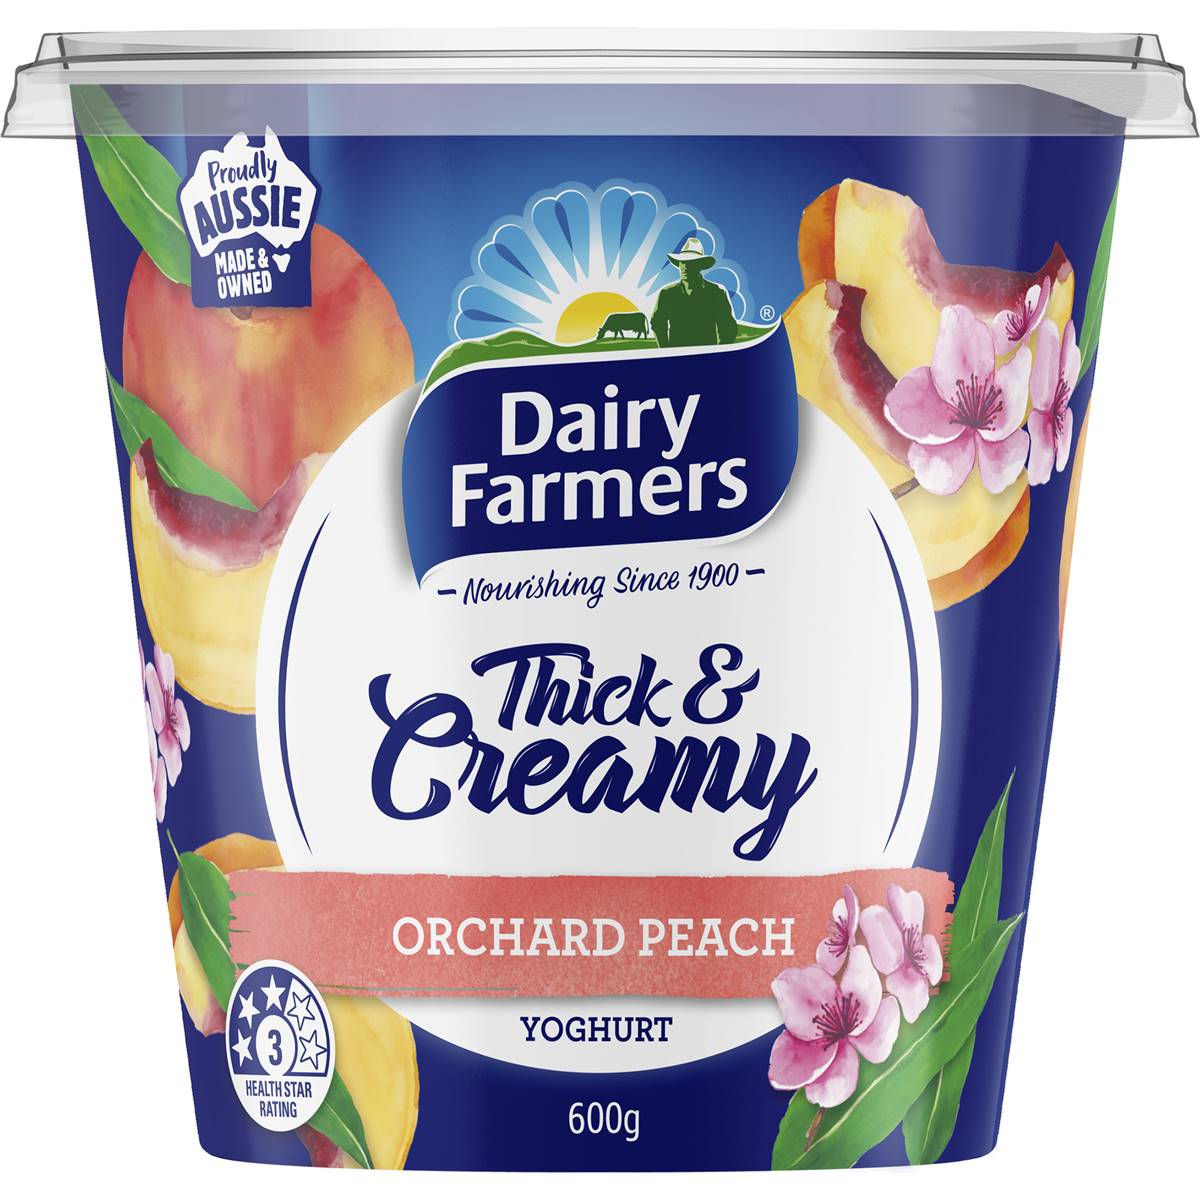 Calories in Dairy Farmers Thick & Creamy Orchard Peach calcount